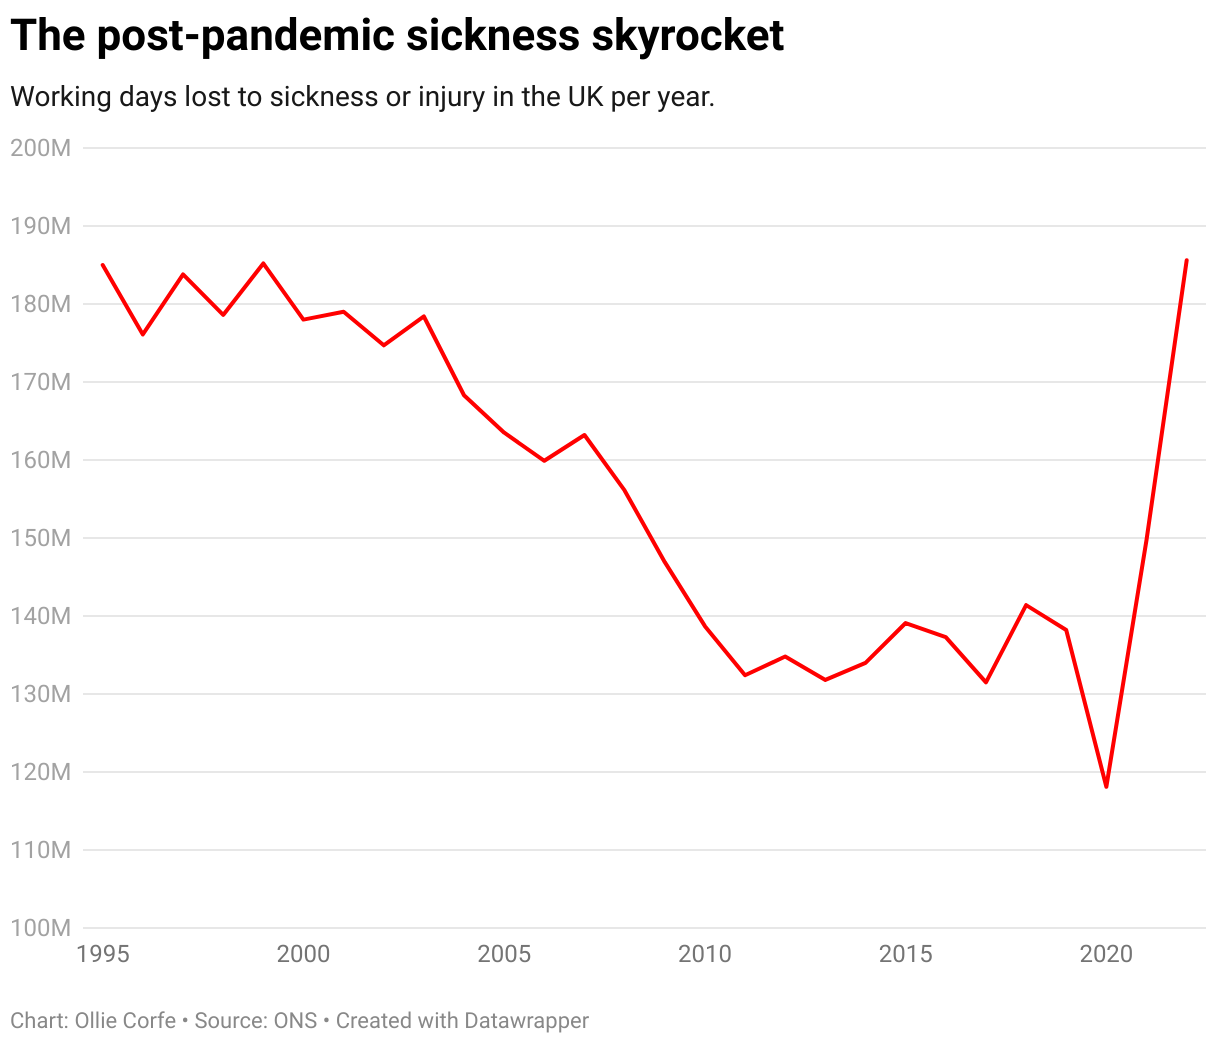 Line chart of working days lost to sickness each year.